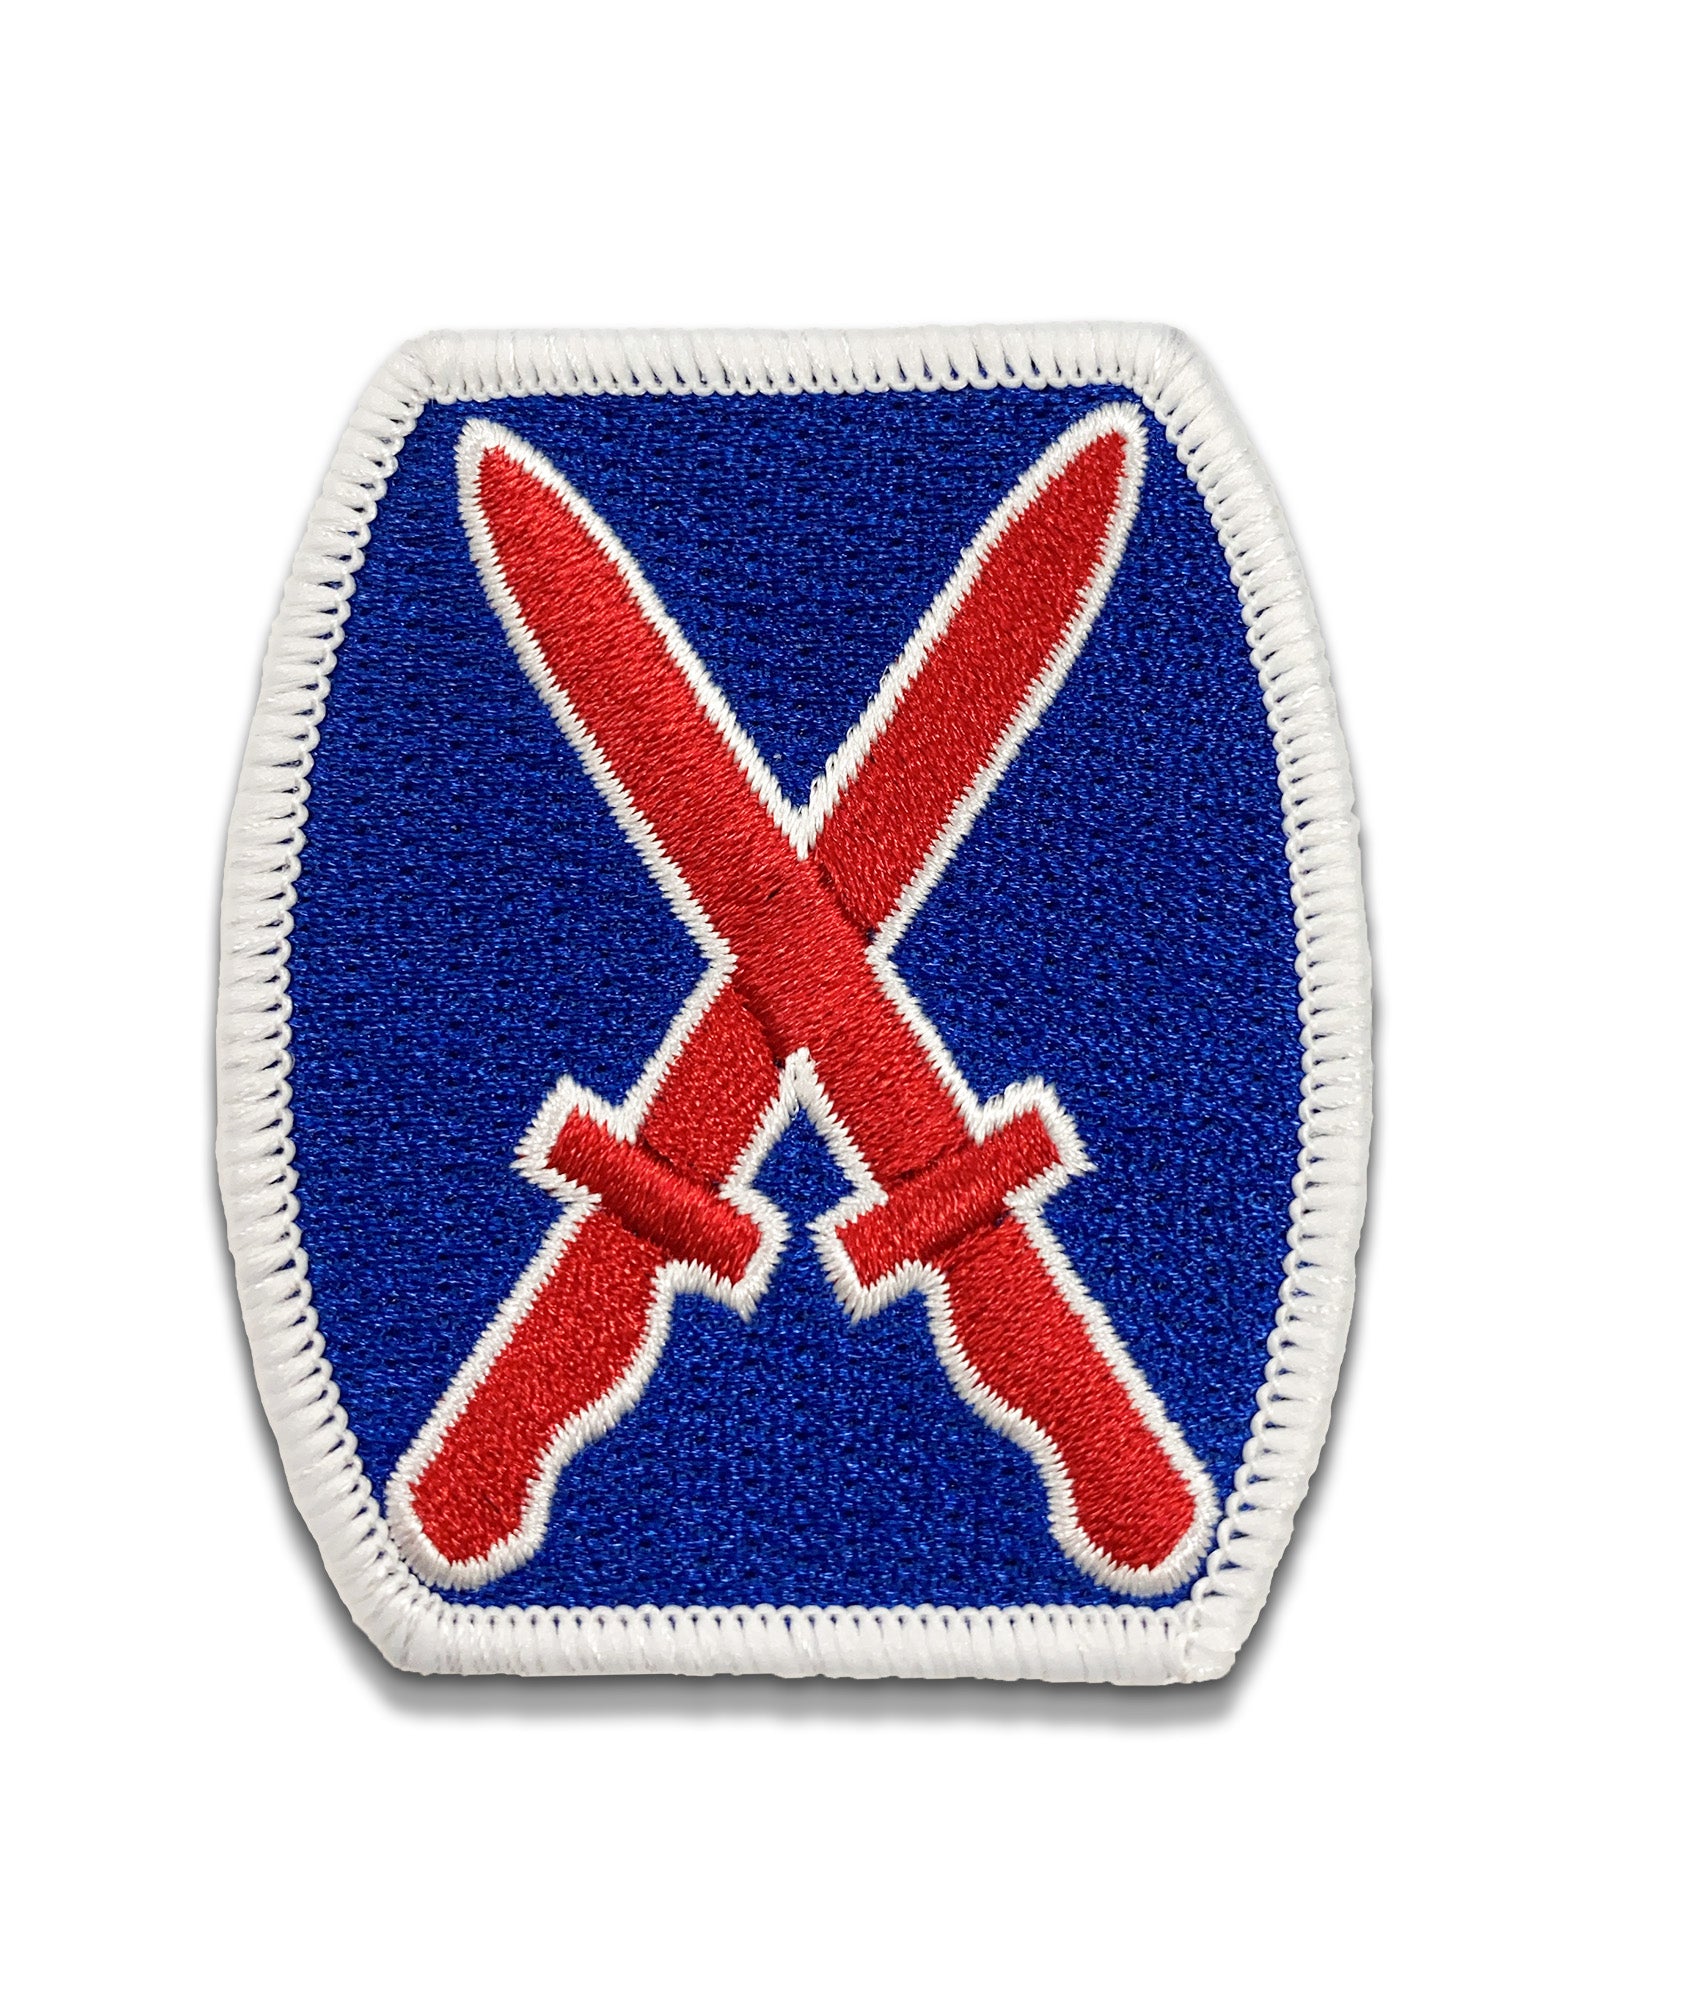 10th Mountain Division Color Sew-on Patch - Insignia Depot